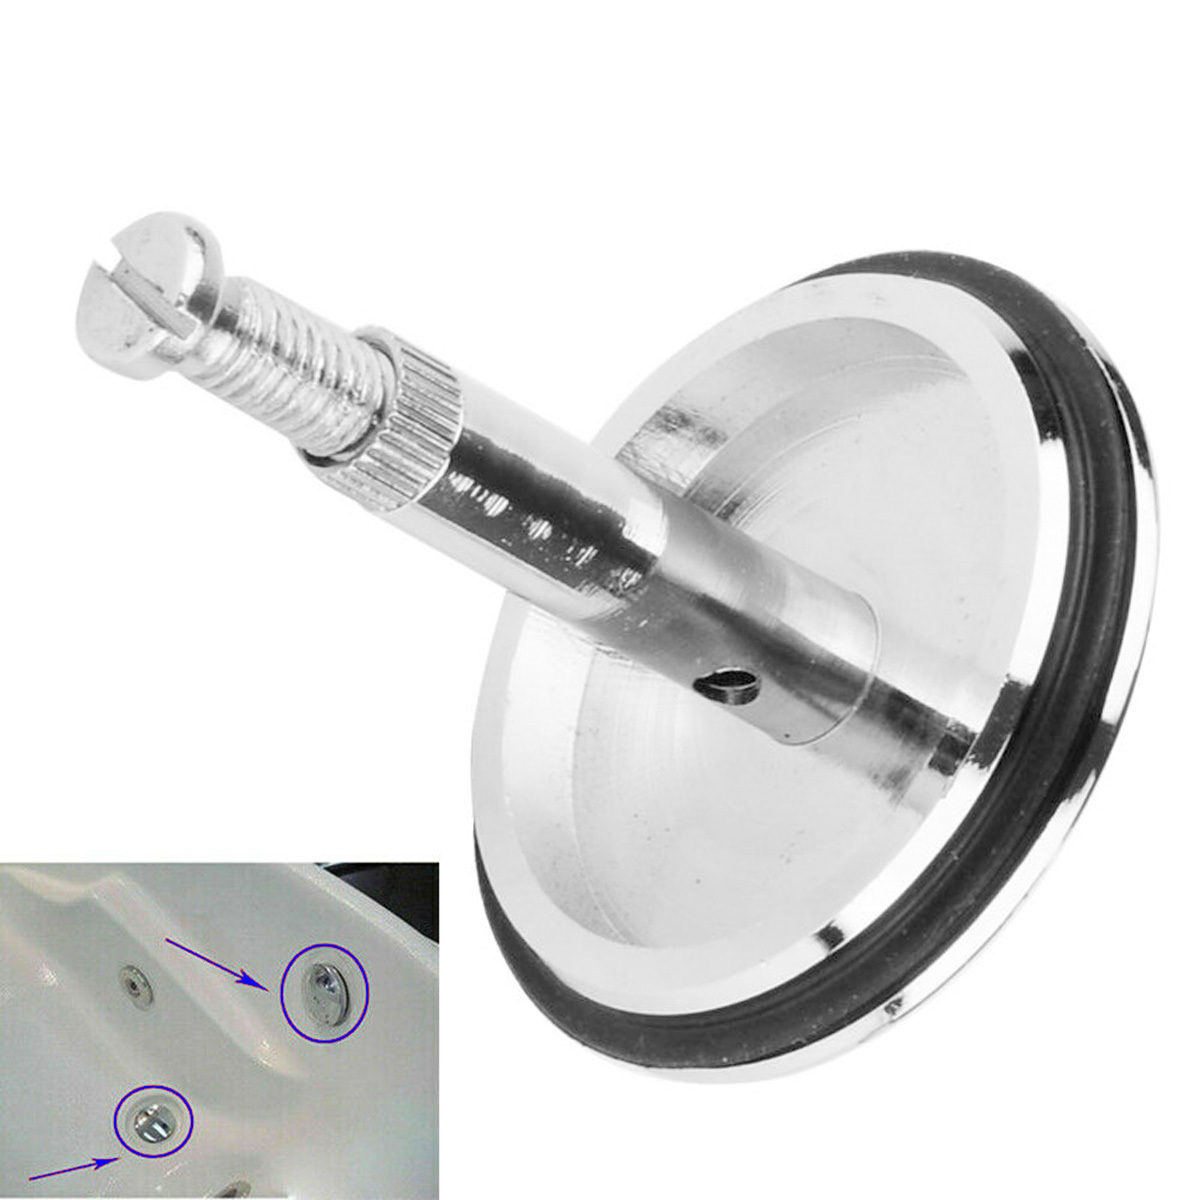 Rubber Sink Plug, Clear Drain Stopper with Hanging Ring for